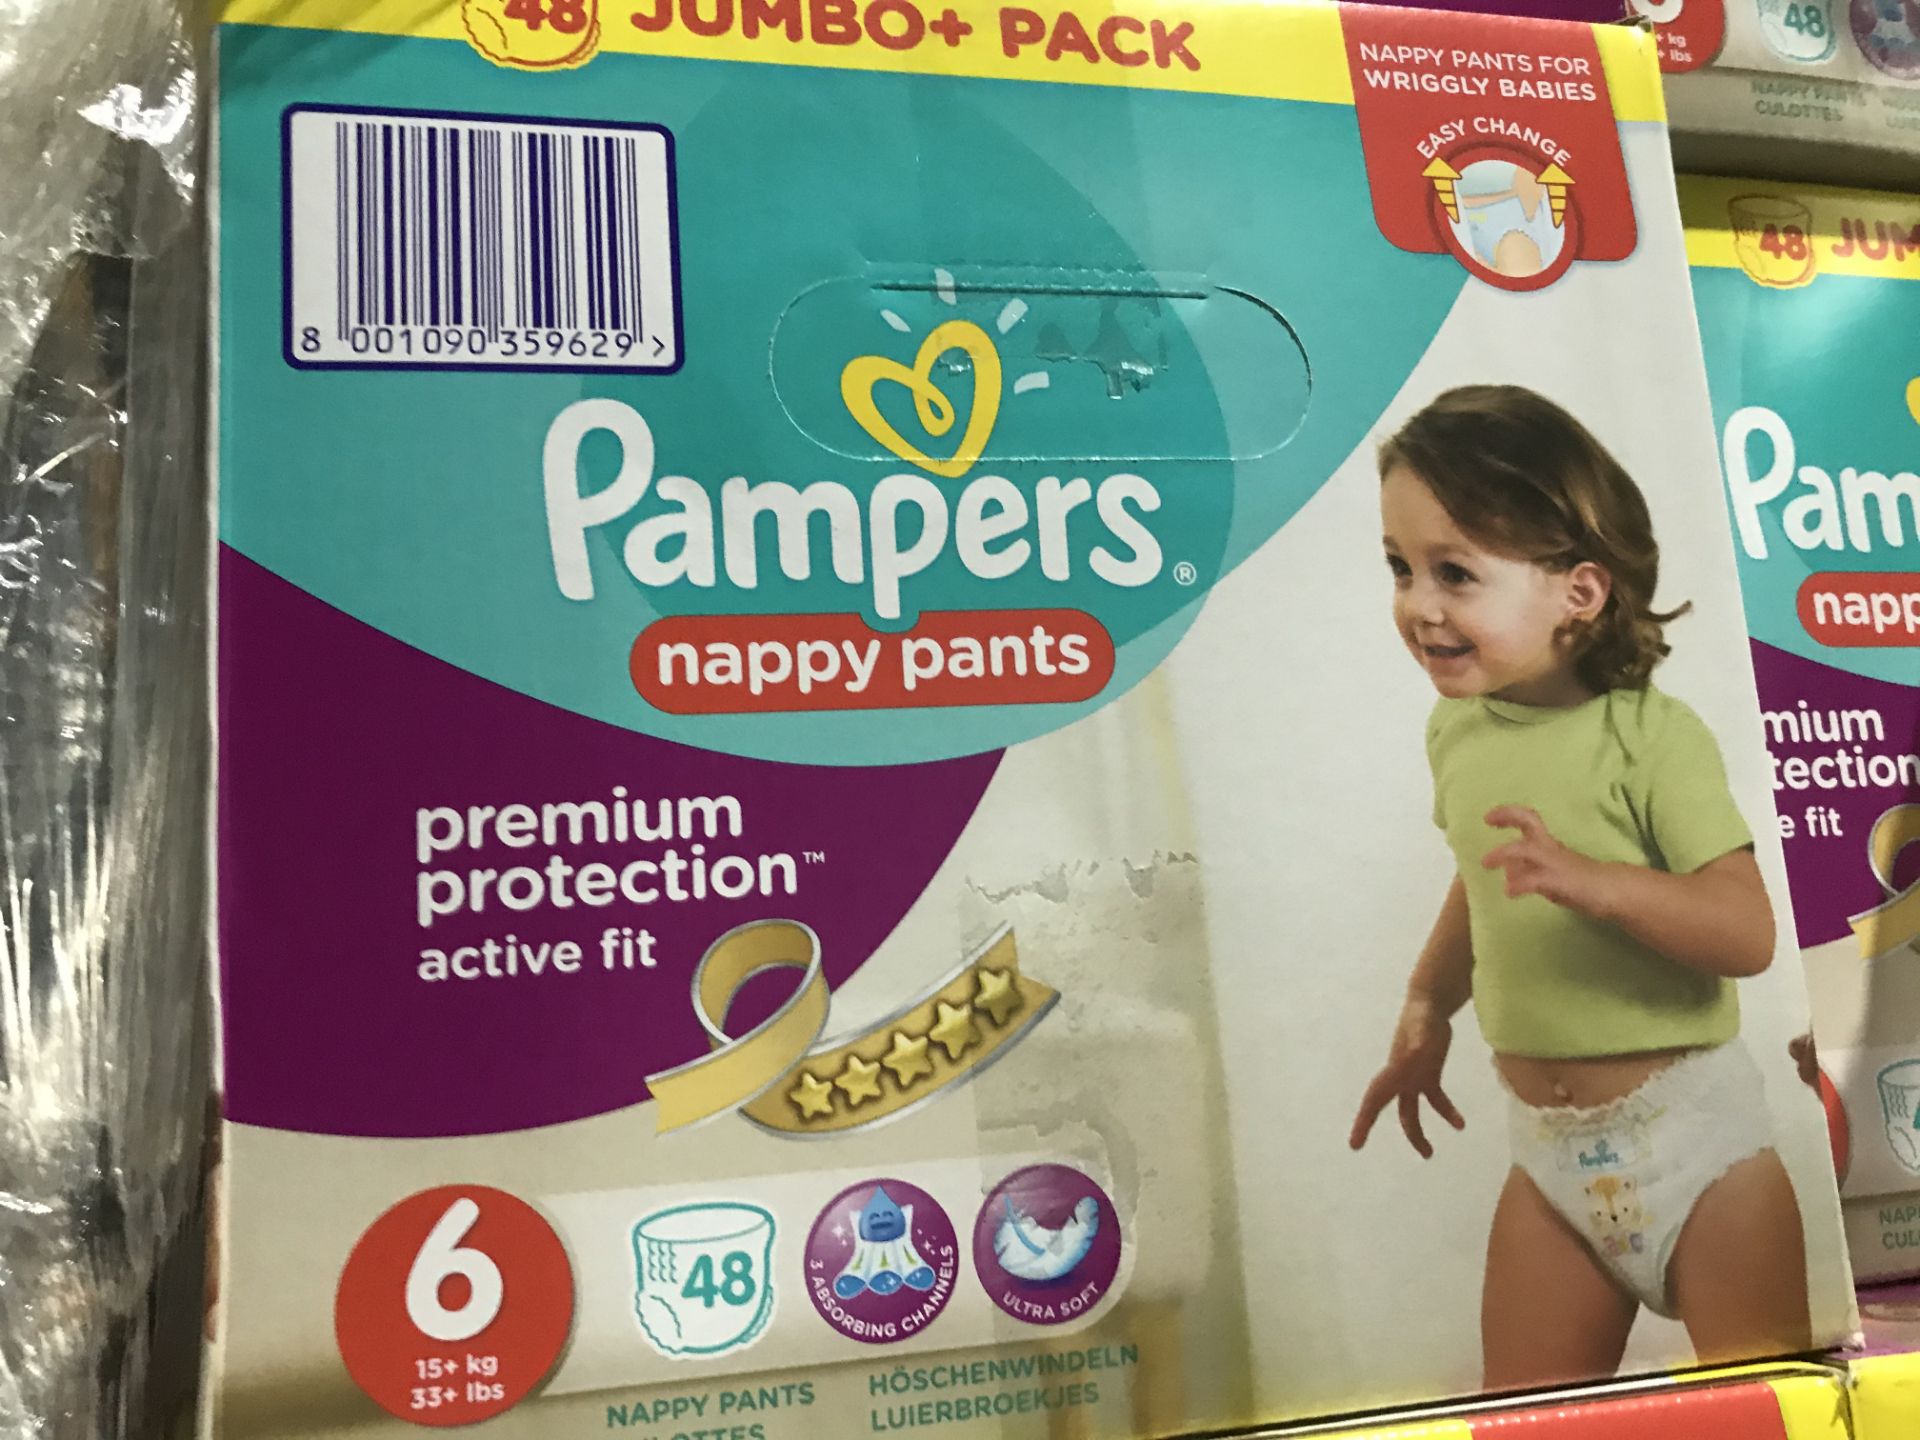 5 X BRAND NEW PAMPERS 48 JUMBO PACK NAPPY PANTS SIZE 6